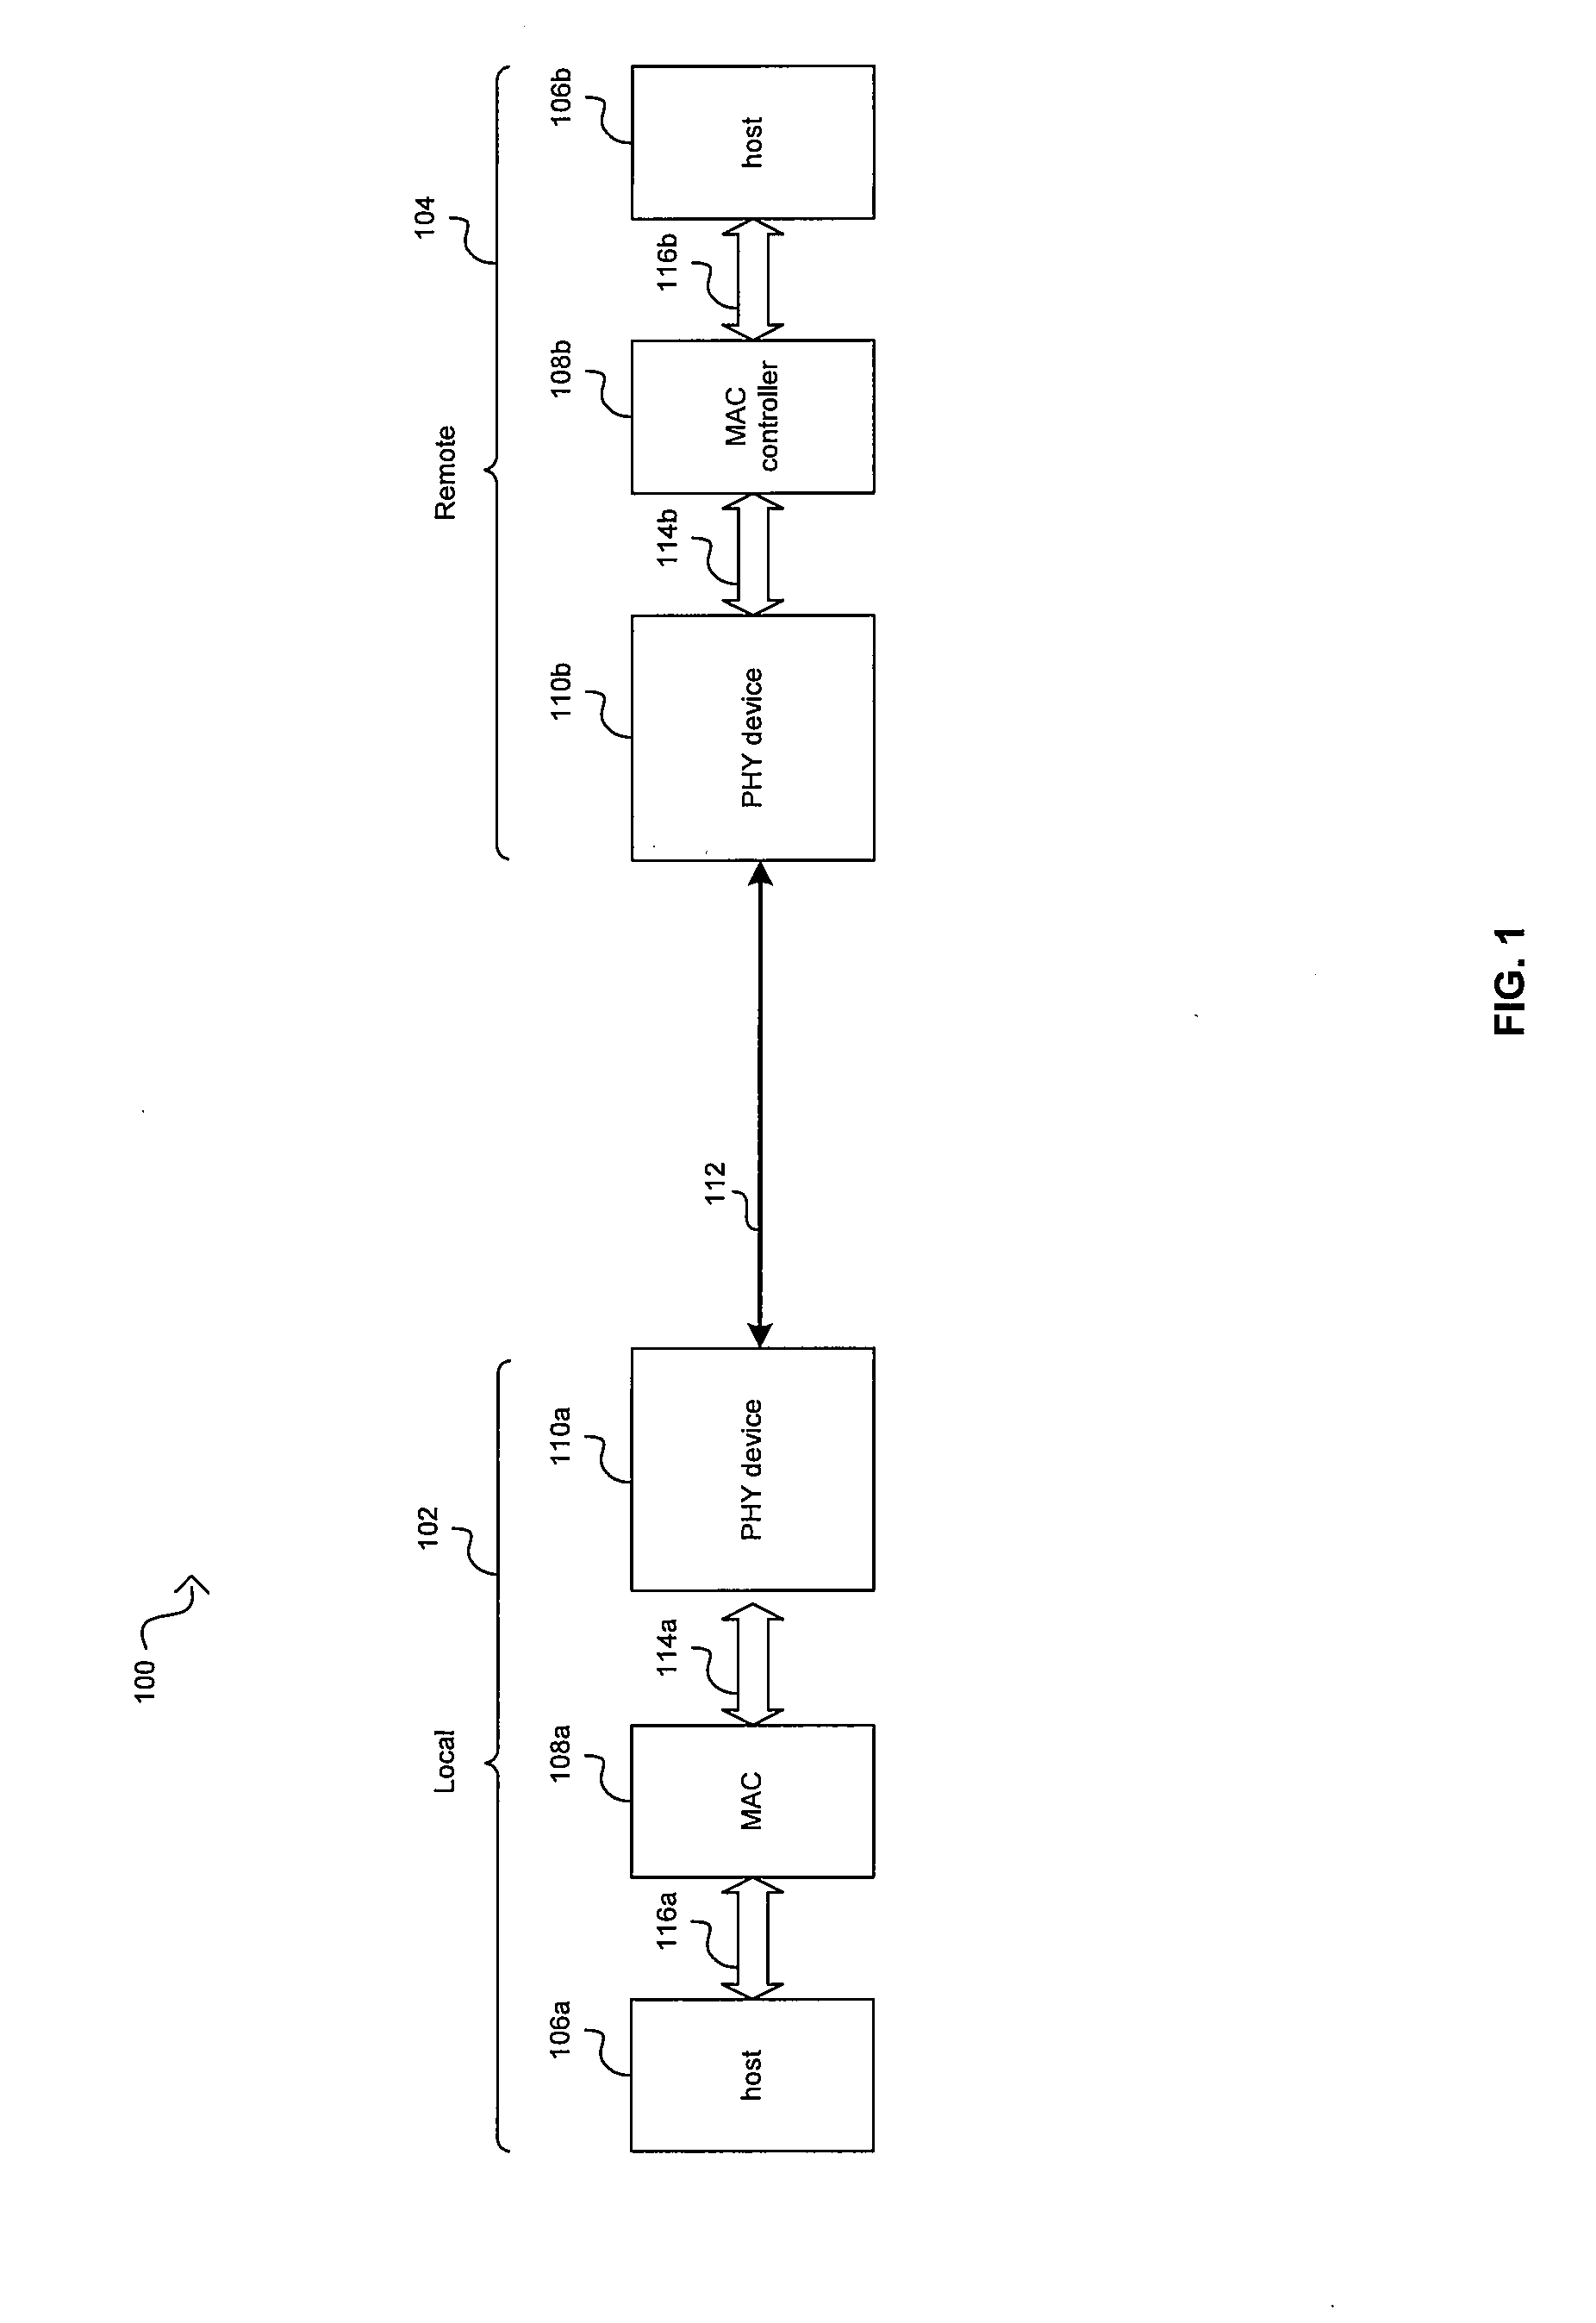 Method And System For A Distinct Physical Pattern On An Active Channel To Indicate A Data Rate Transition For Energy Efficient Ethernet